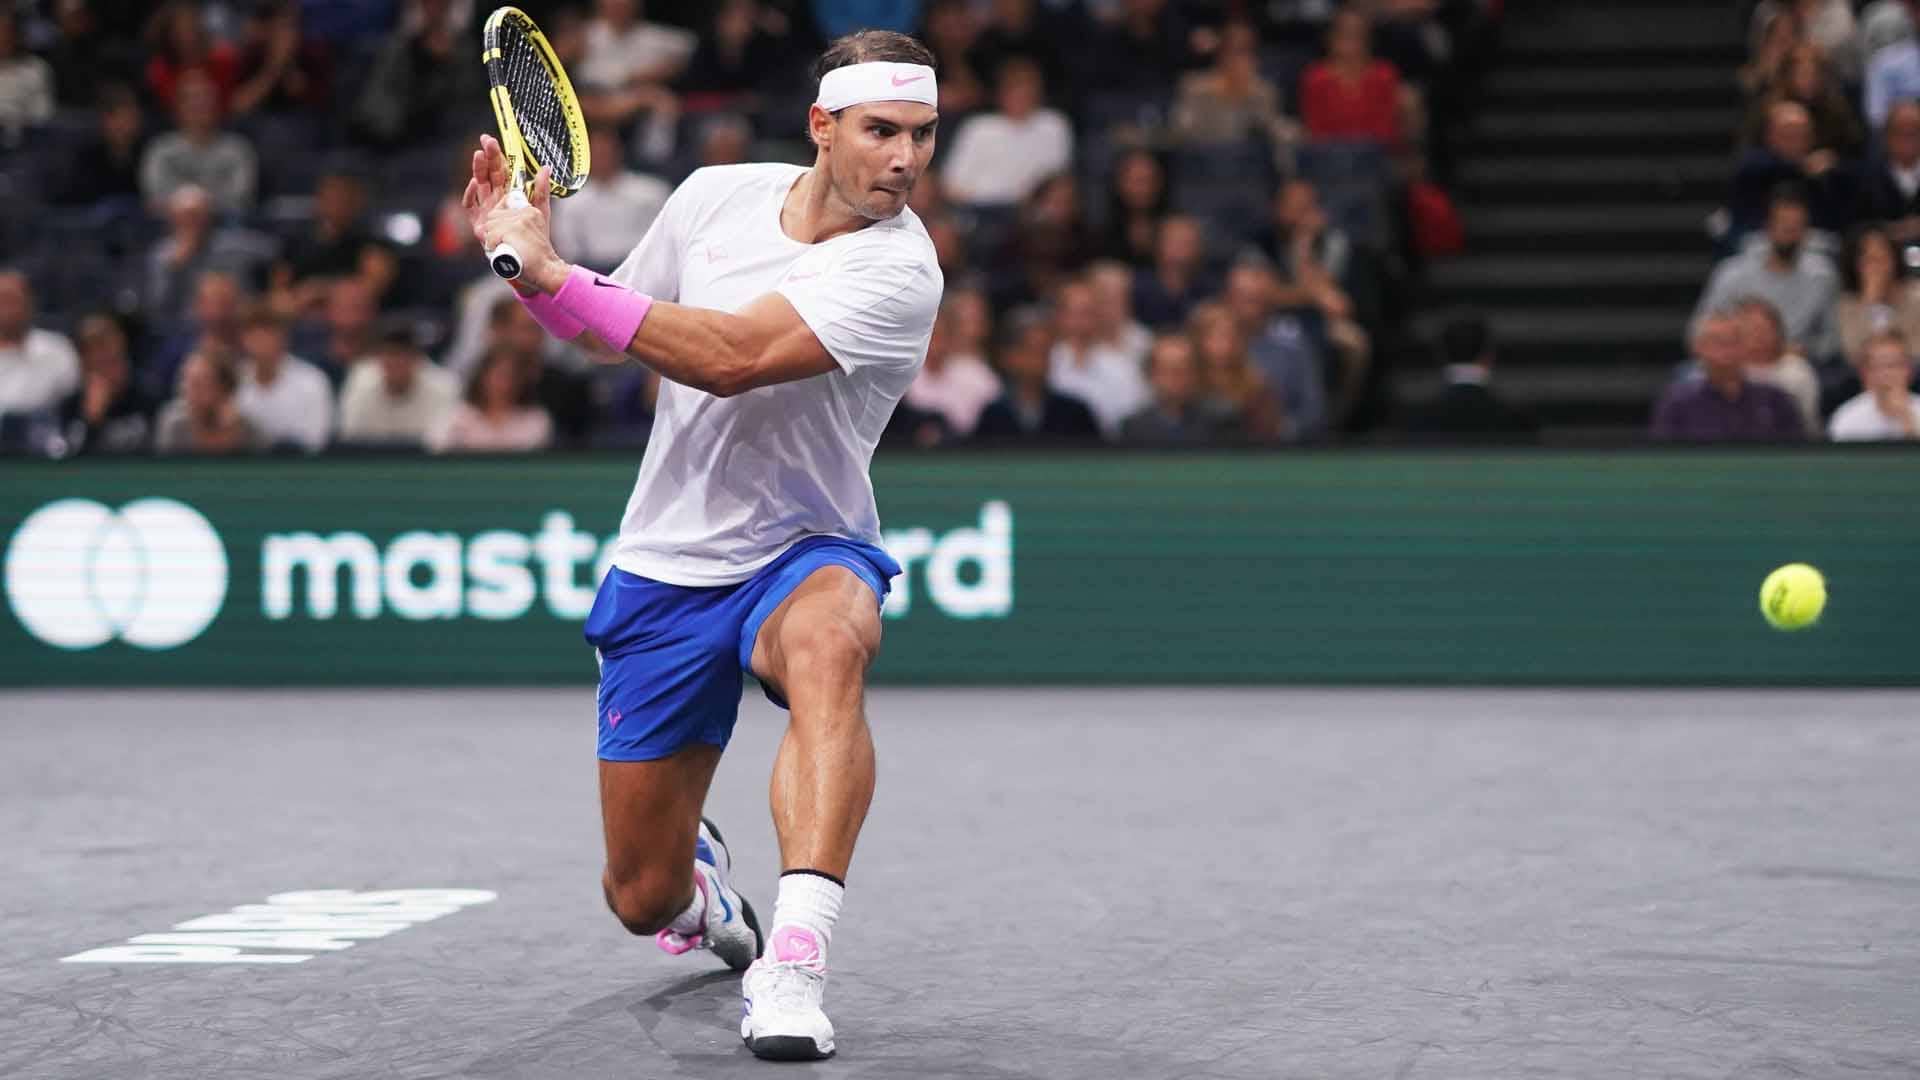 Rafael Nadal has withdrawn from the Rolex Paris Masters due to injury.